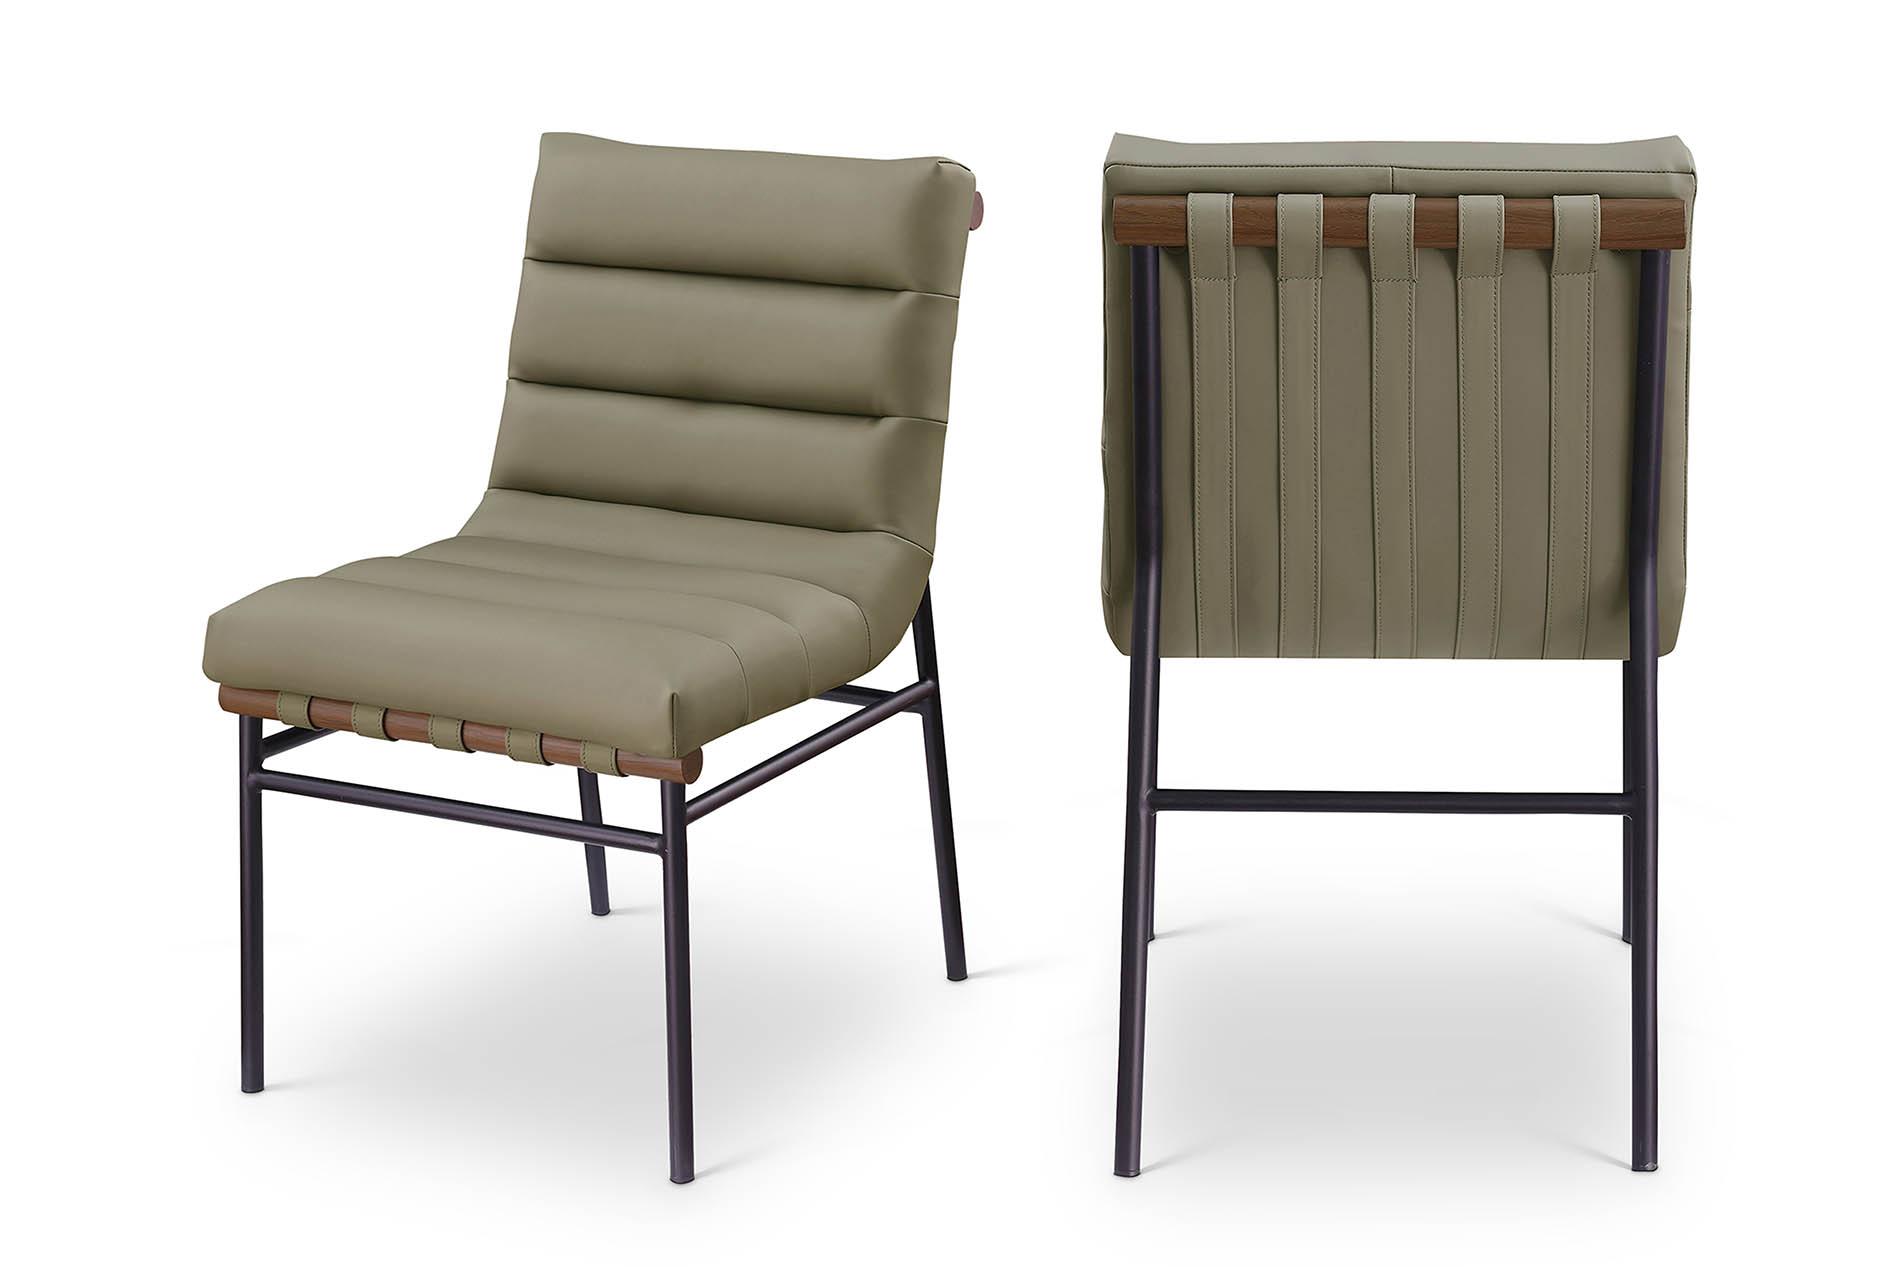 Contemporary, Modern Dining Chair Set 577Olive-C 577Olive-C in Olive Faux Leather